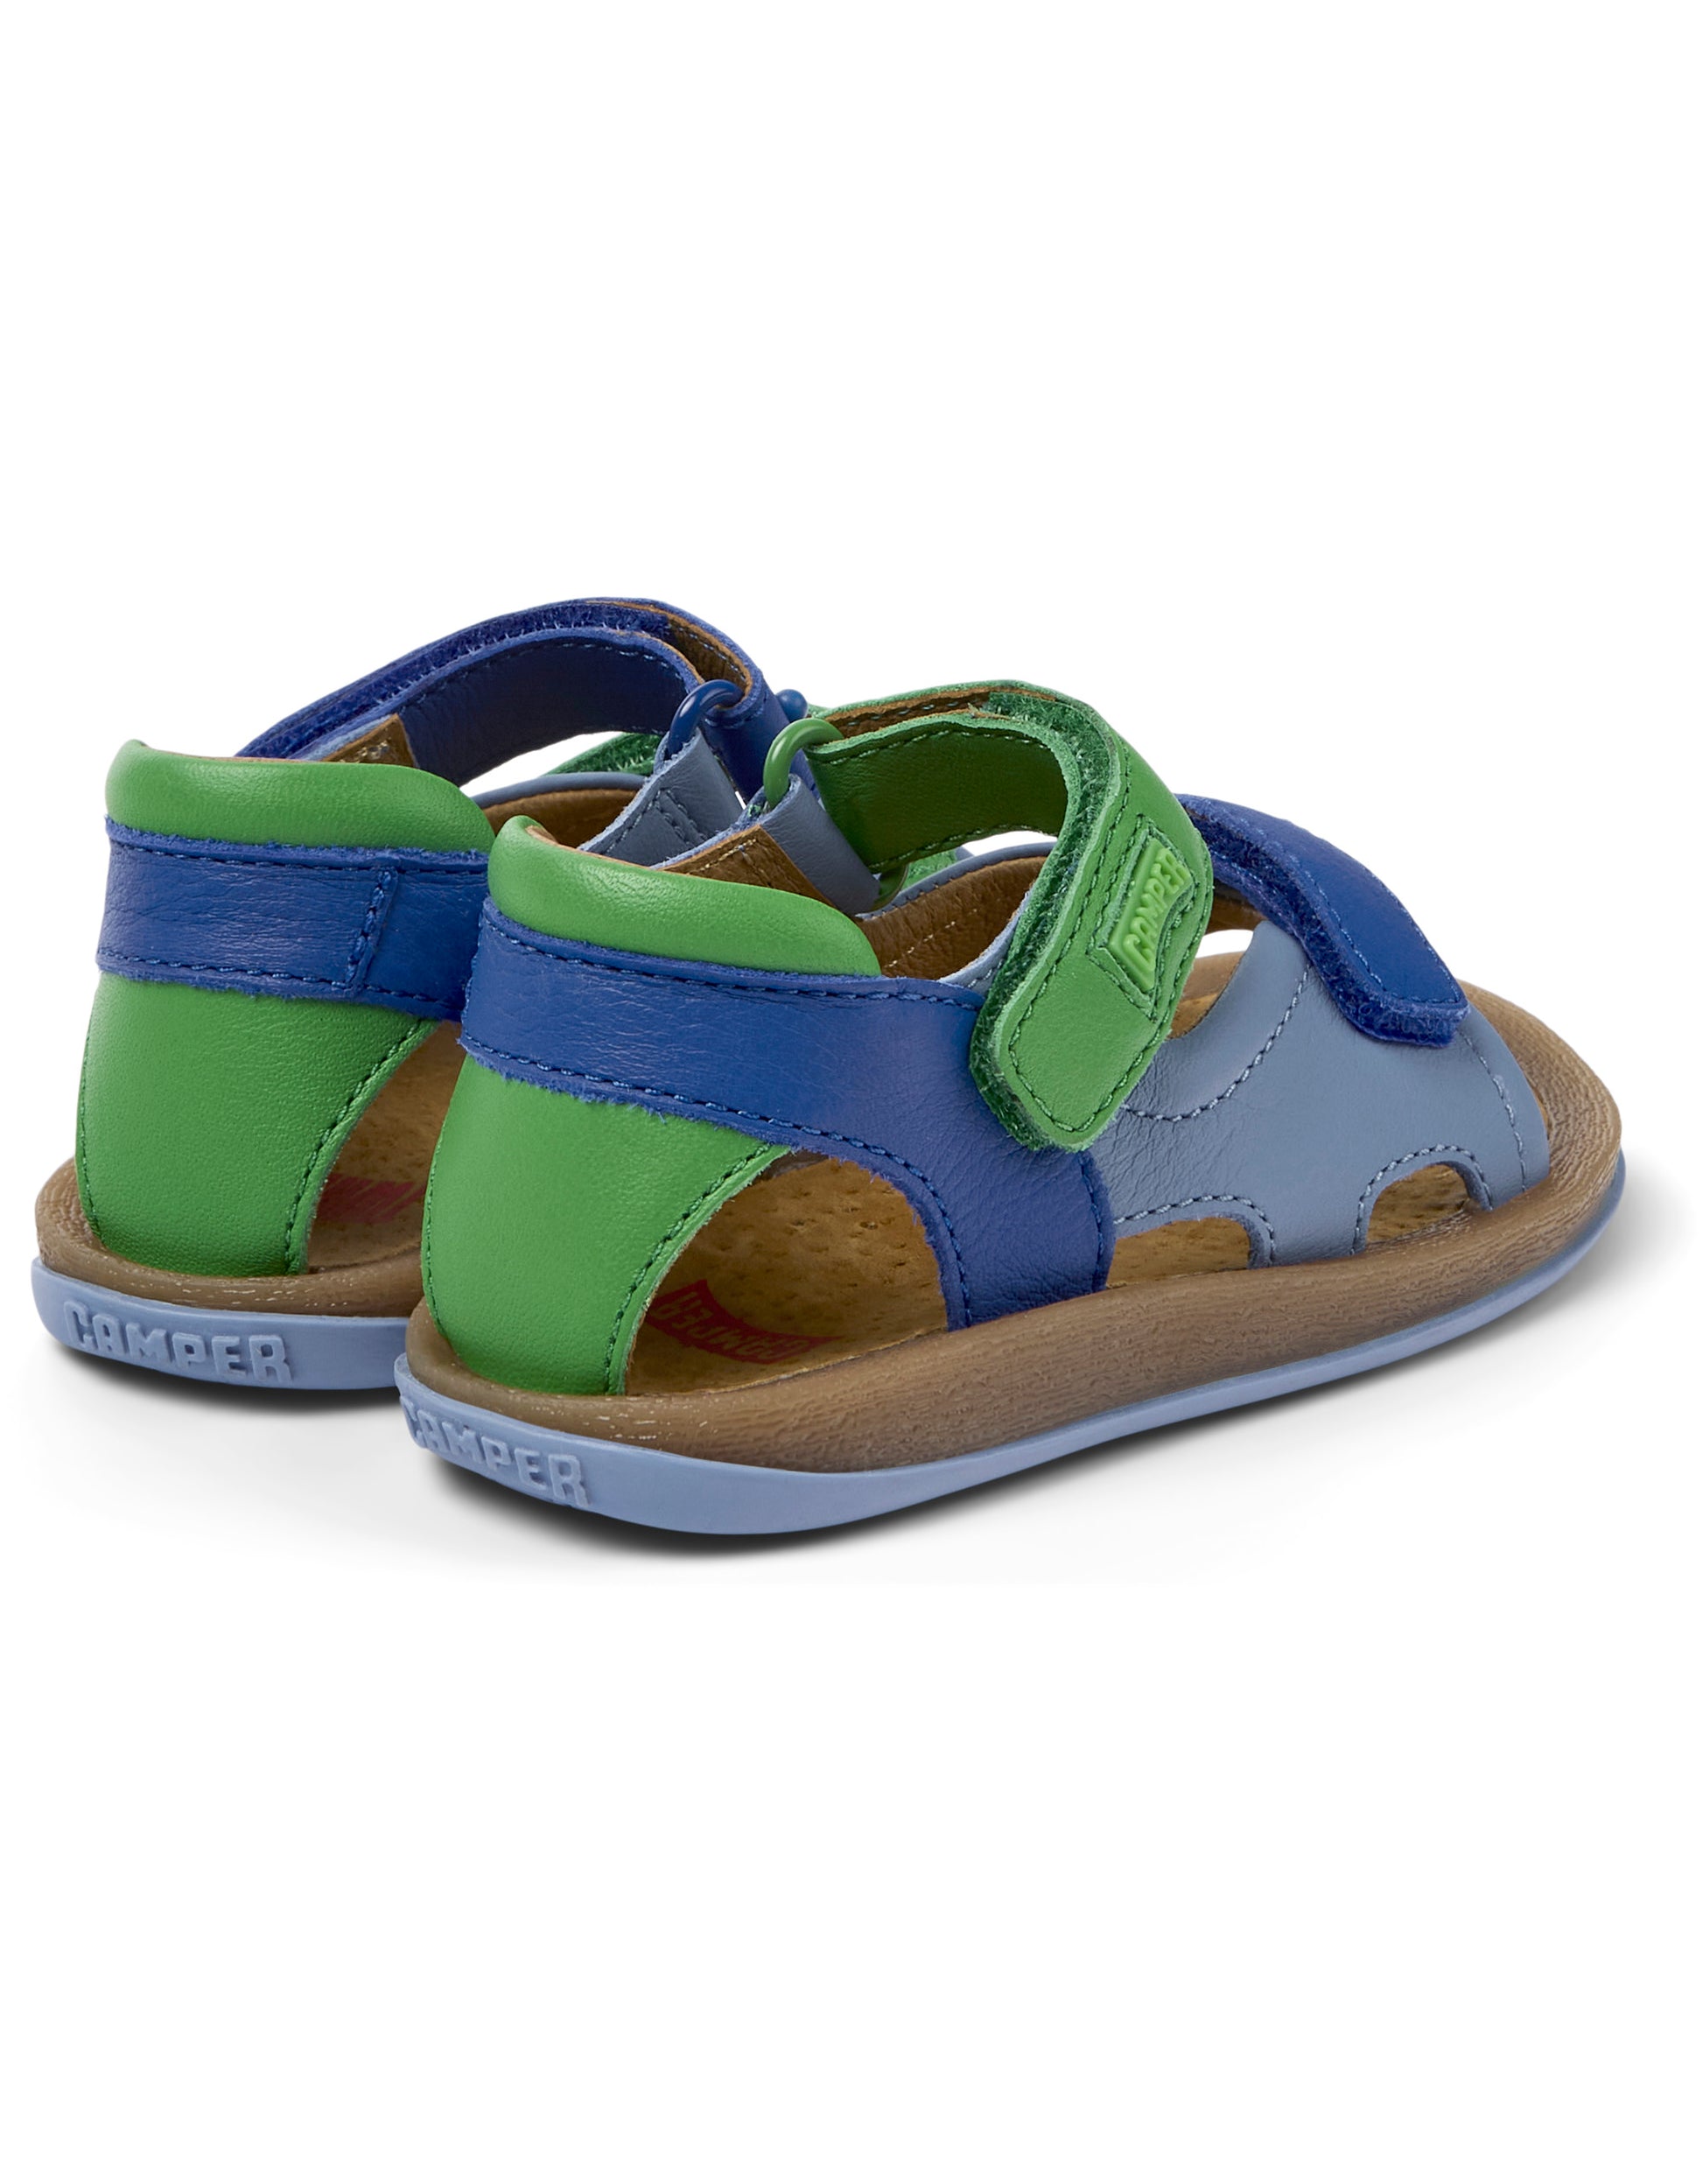 A unisex sandal by Camper, style Twins, open toe with a back in blue and green. Rear angled view of a pair.